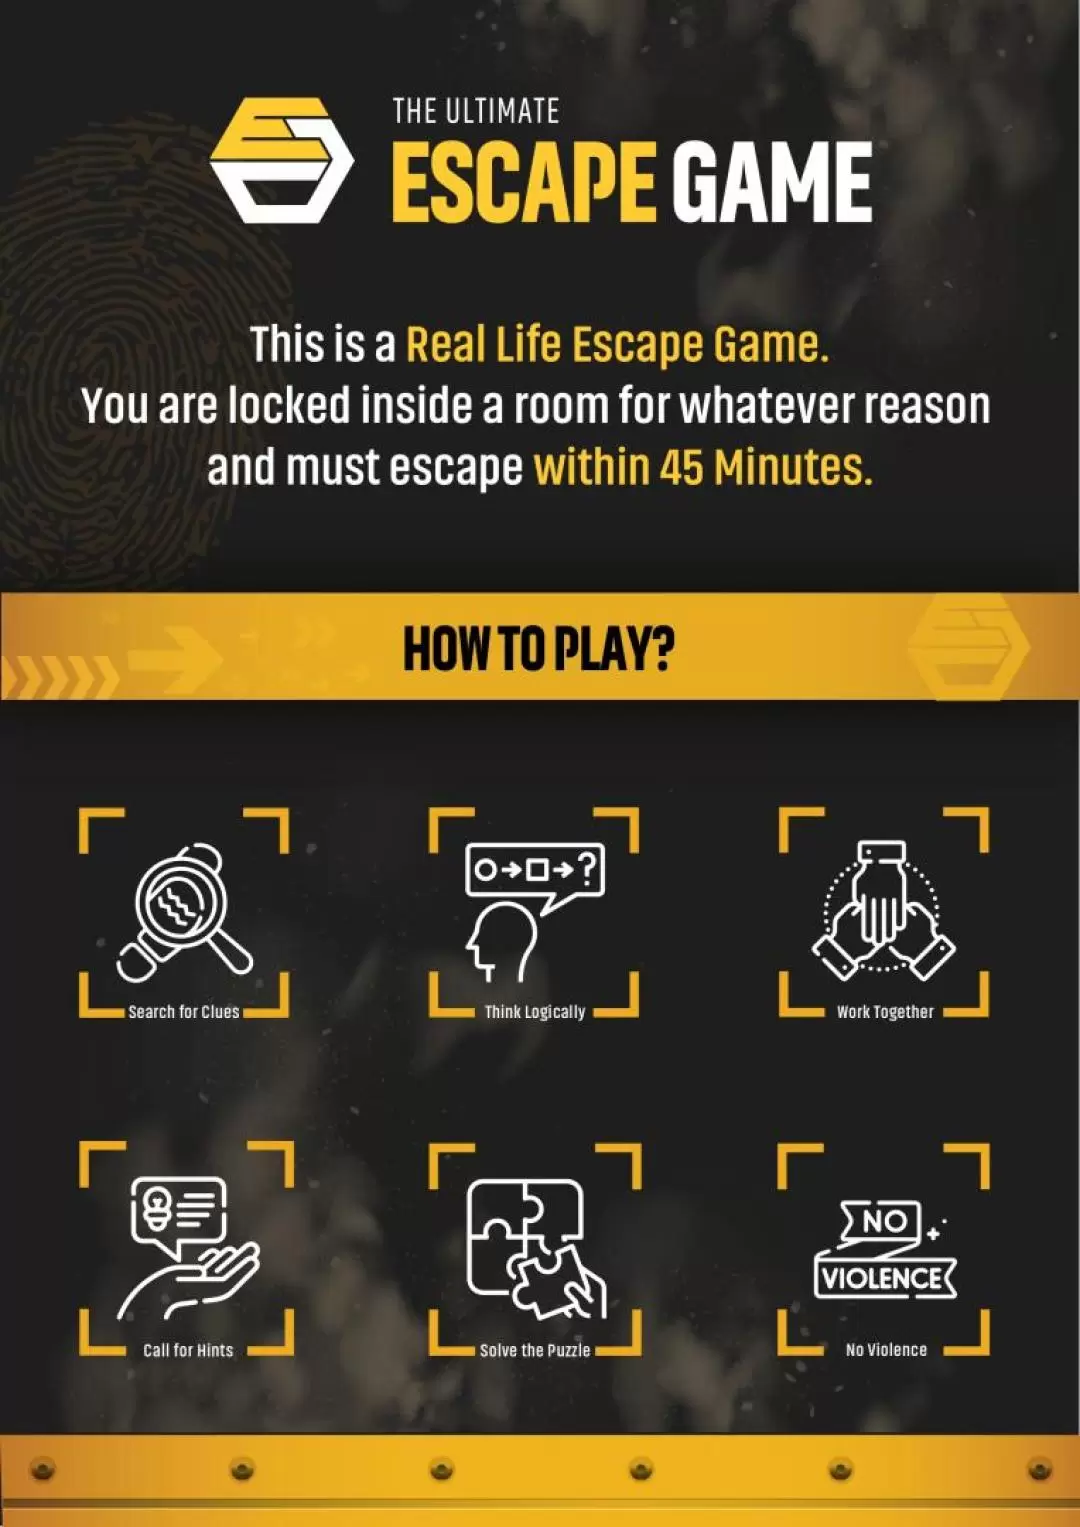 The Ultimate Escape Game Experience in Kuala Lumpur